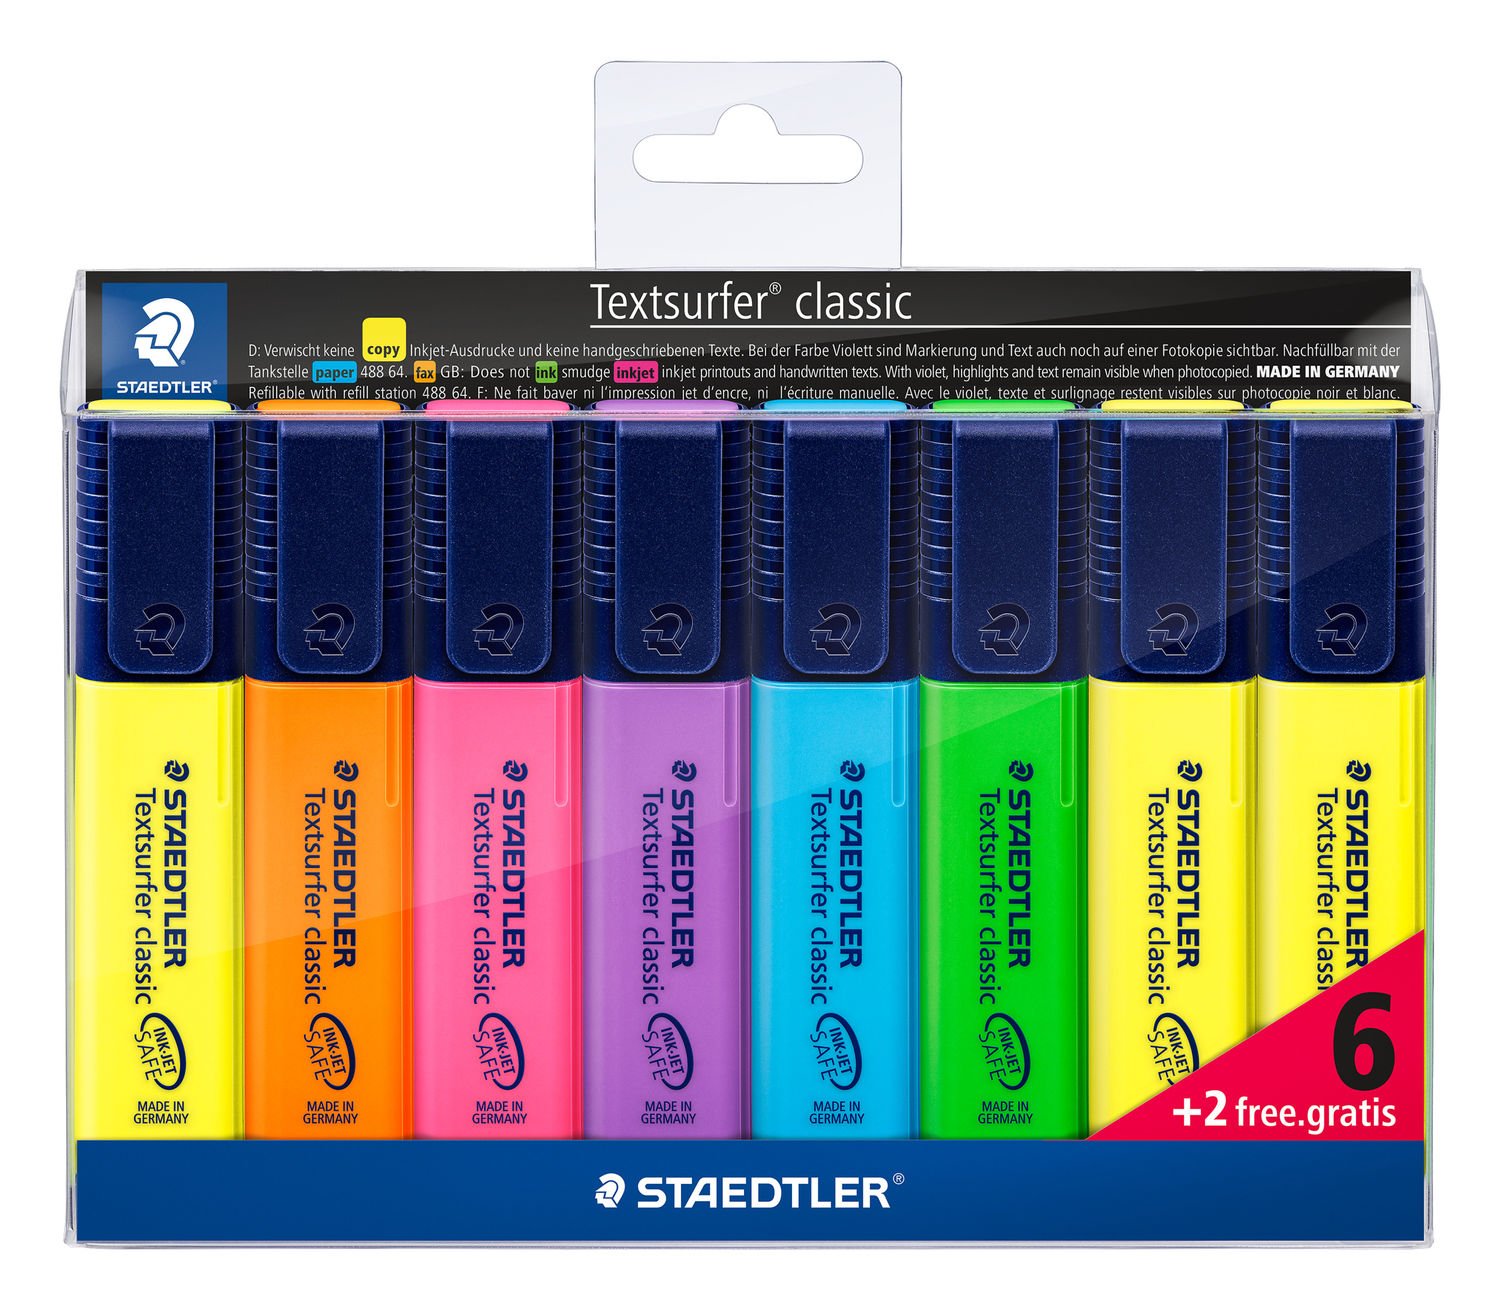 Staedtler Textsurfer Bright Highlighter Pens mixed pack of 8